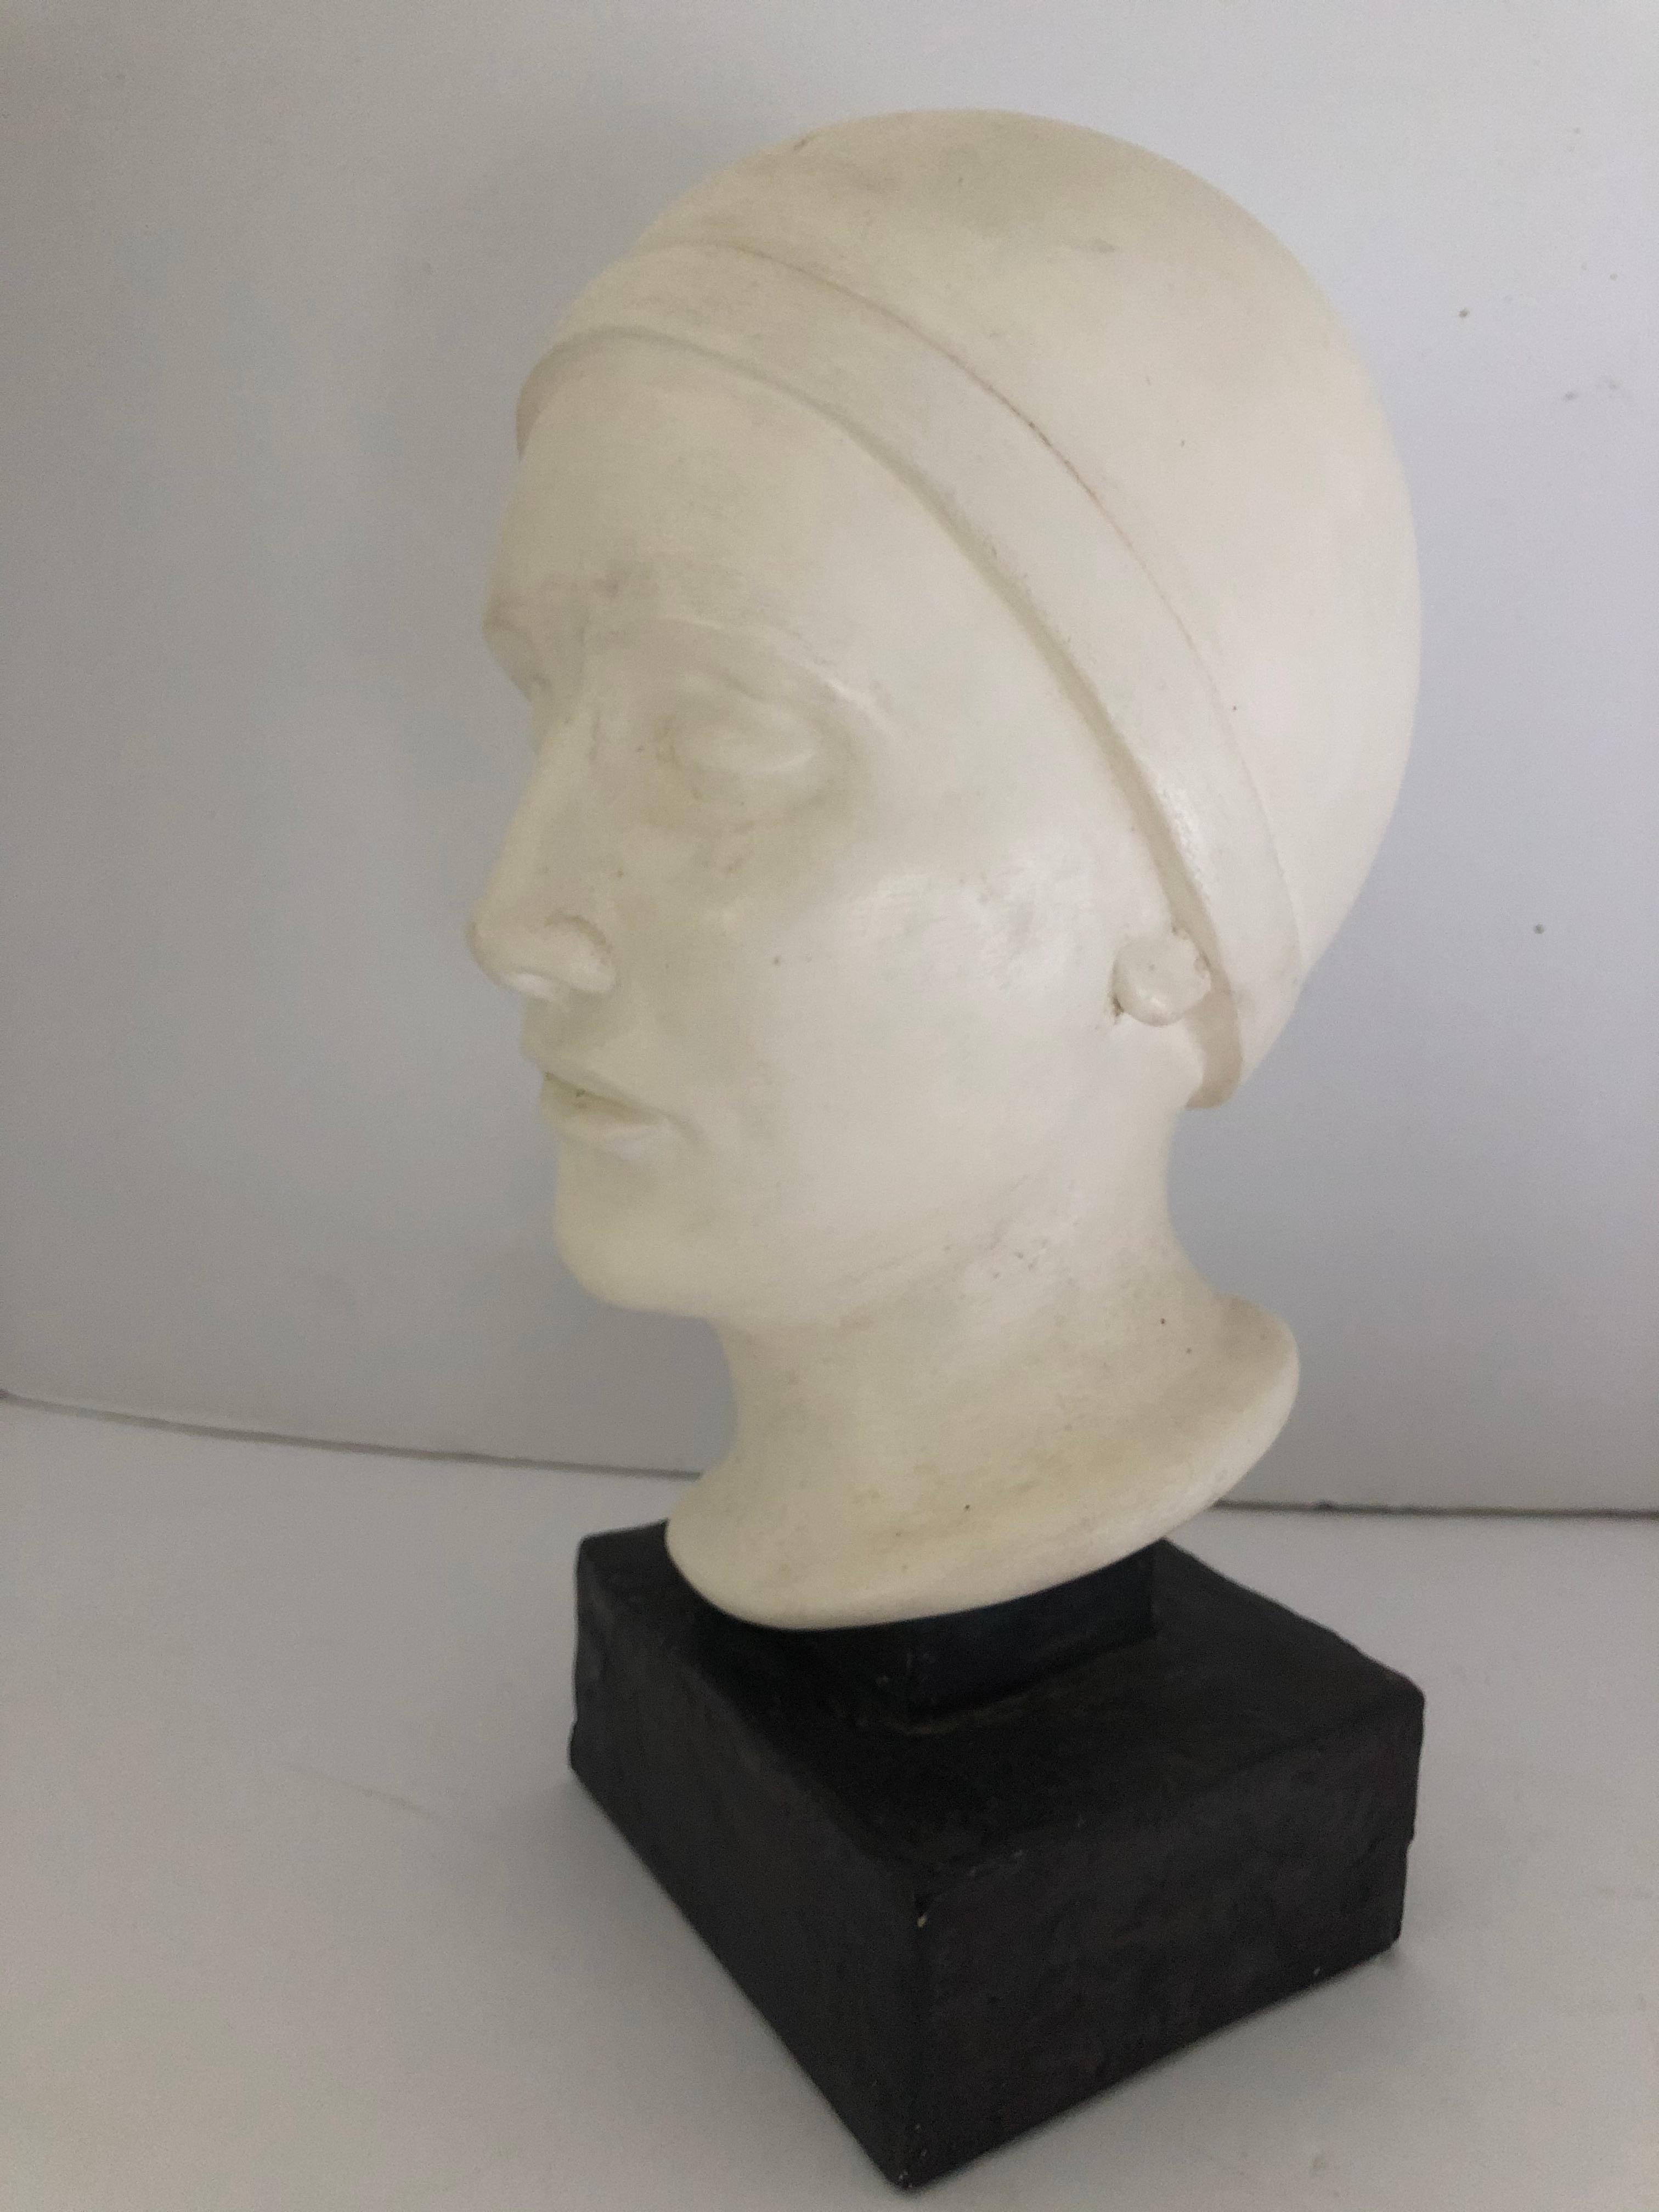 American Vintage Plaster Bust of Woman in the Art Deco Style